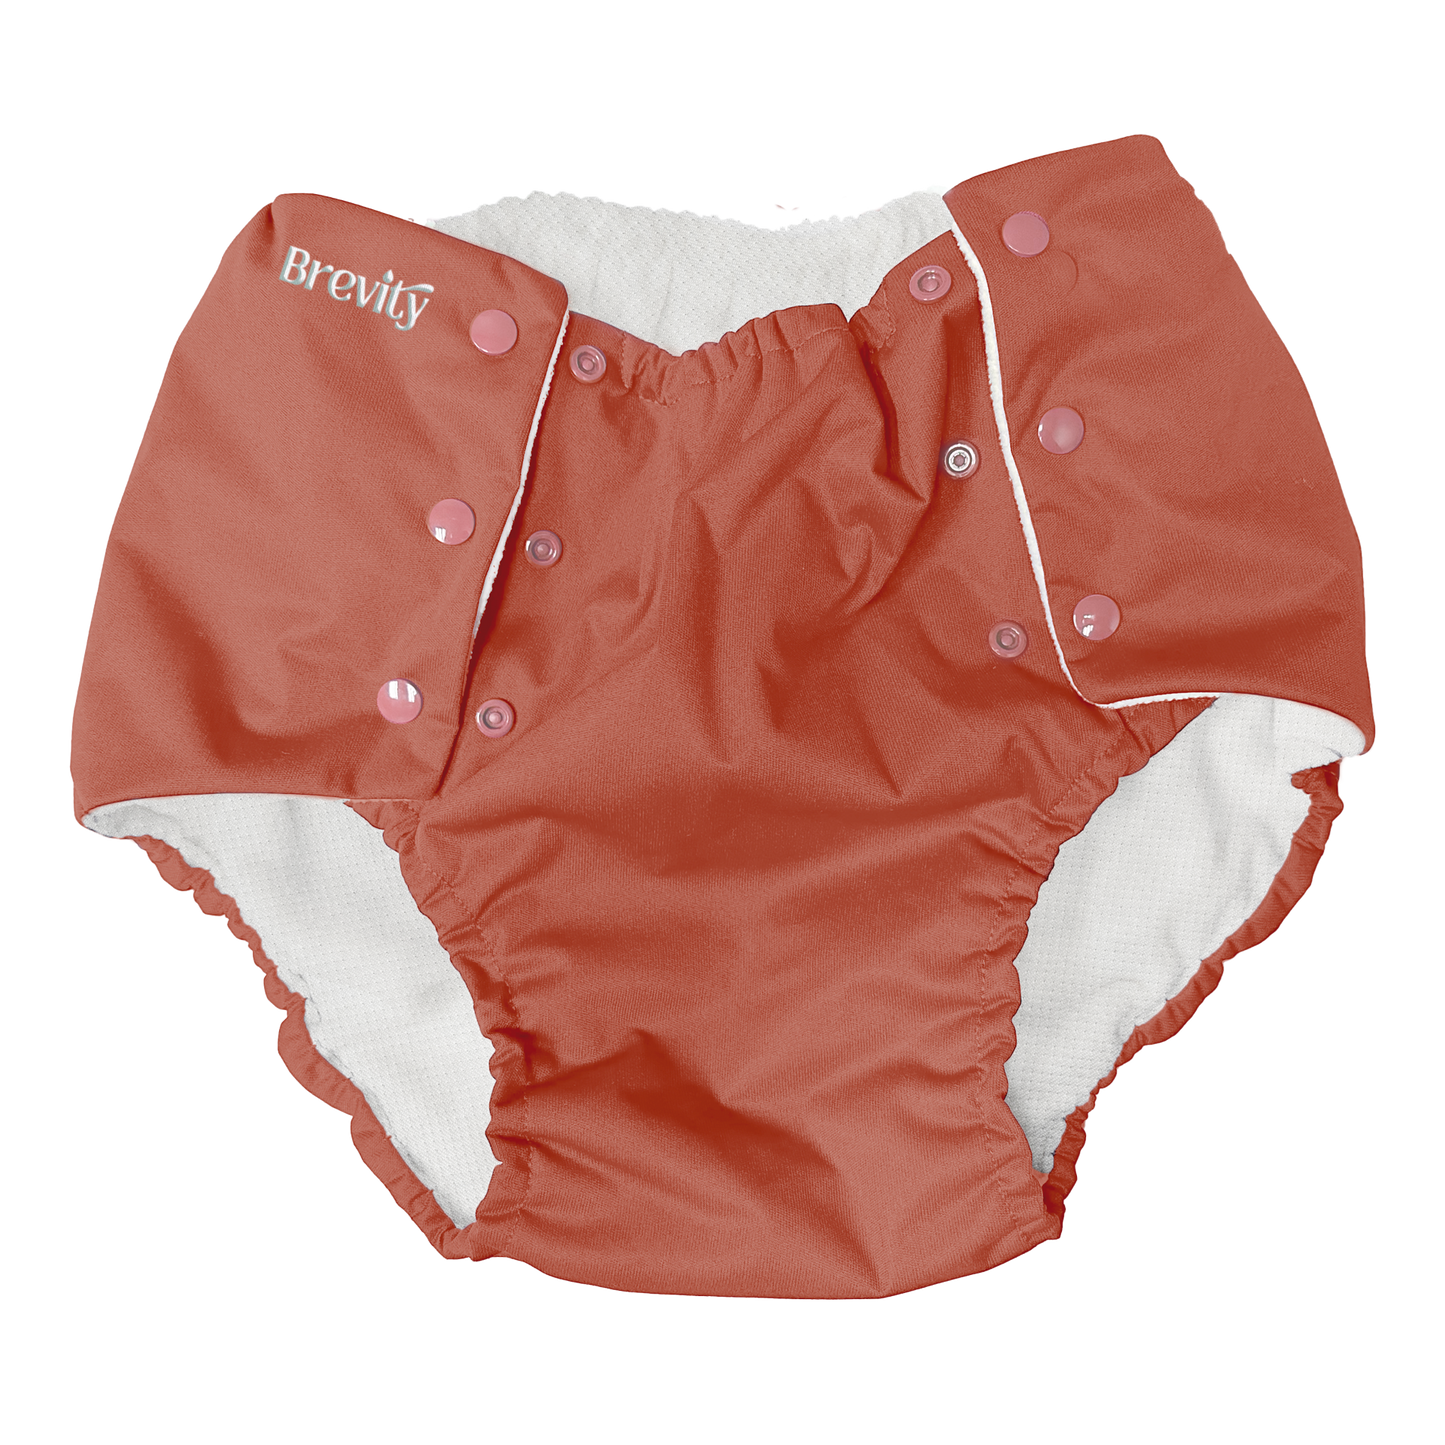 Adult Modern Reusable Incontinence Brief with Breathable Mesh Lining